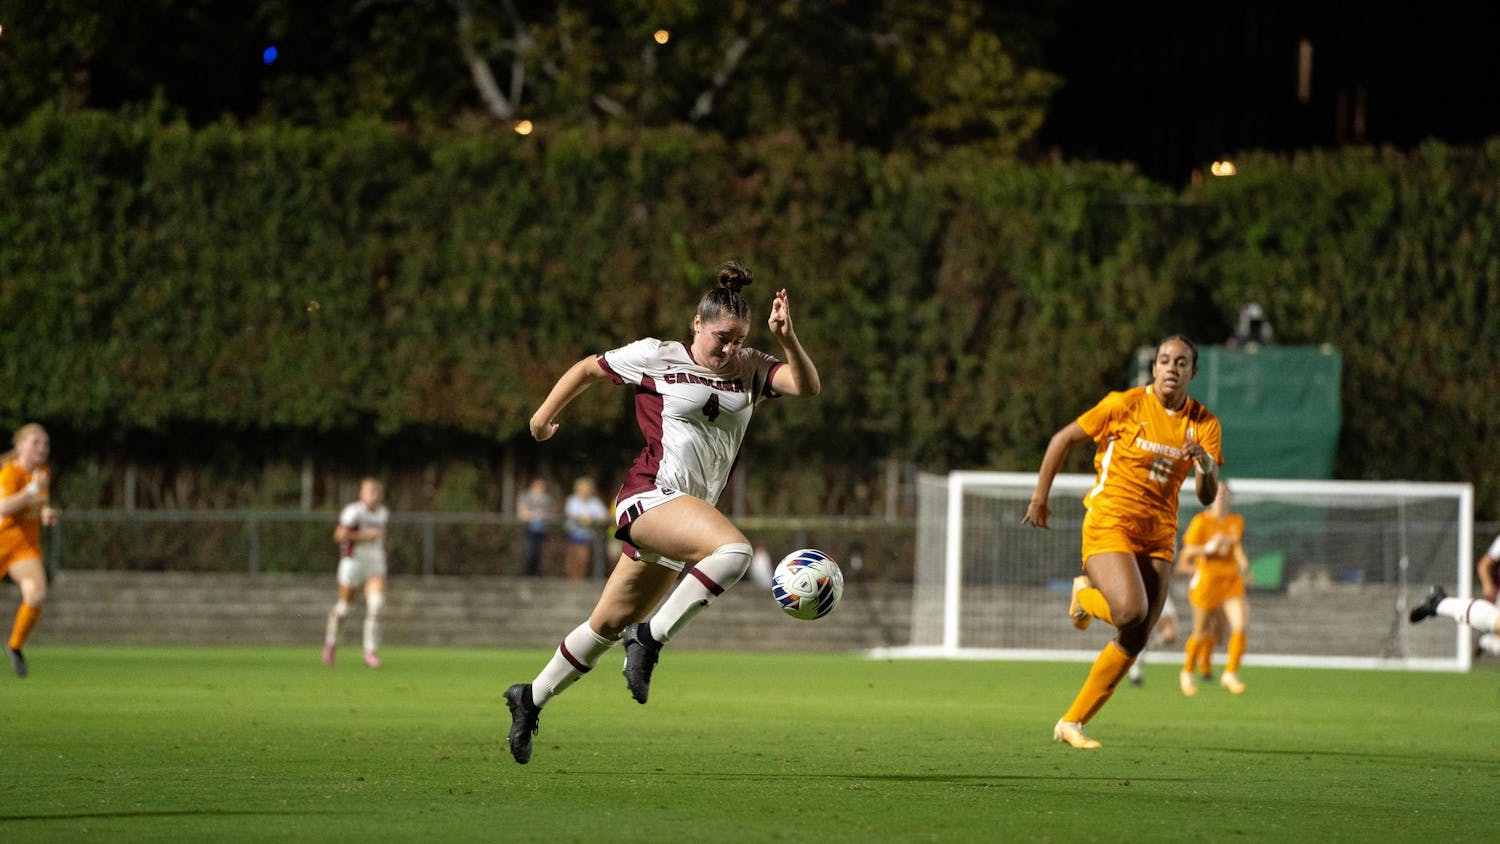 Sophomore forward Shae O'Rourke sprints down the sideline. The Gamecocks drew 1-1 with the visiting Tennessee Volunteers.